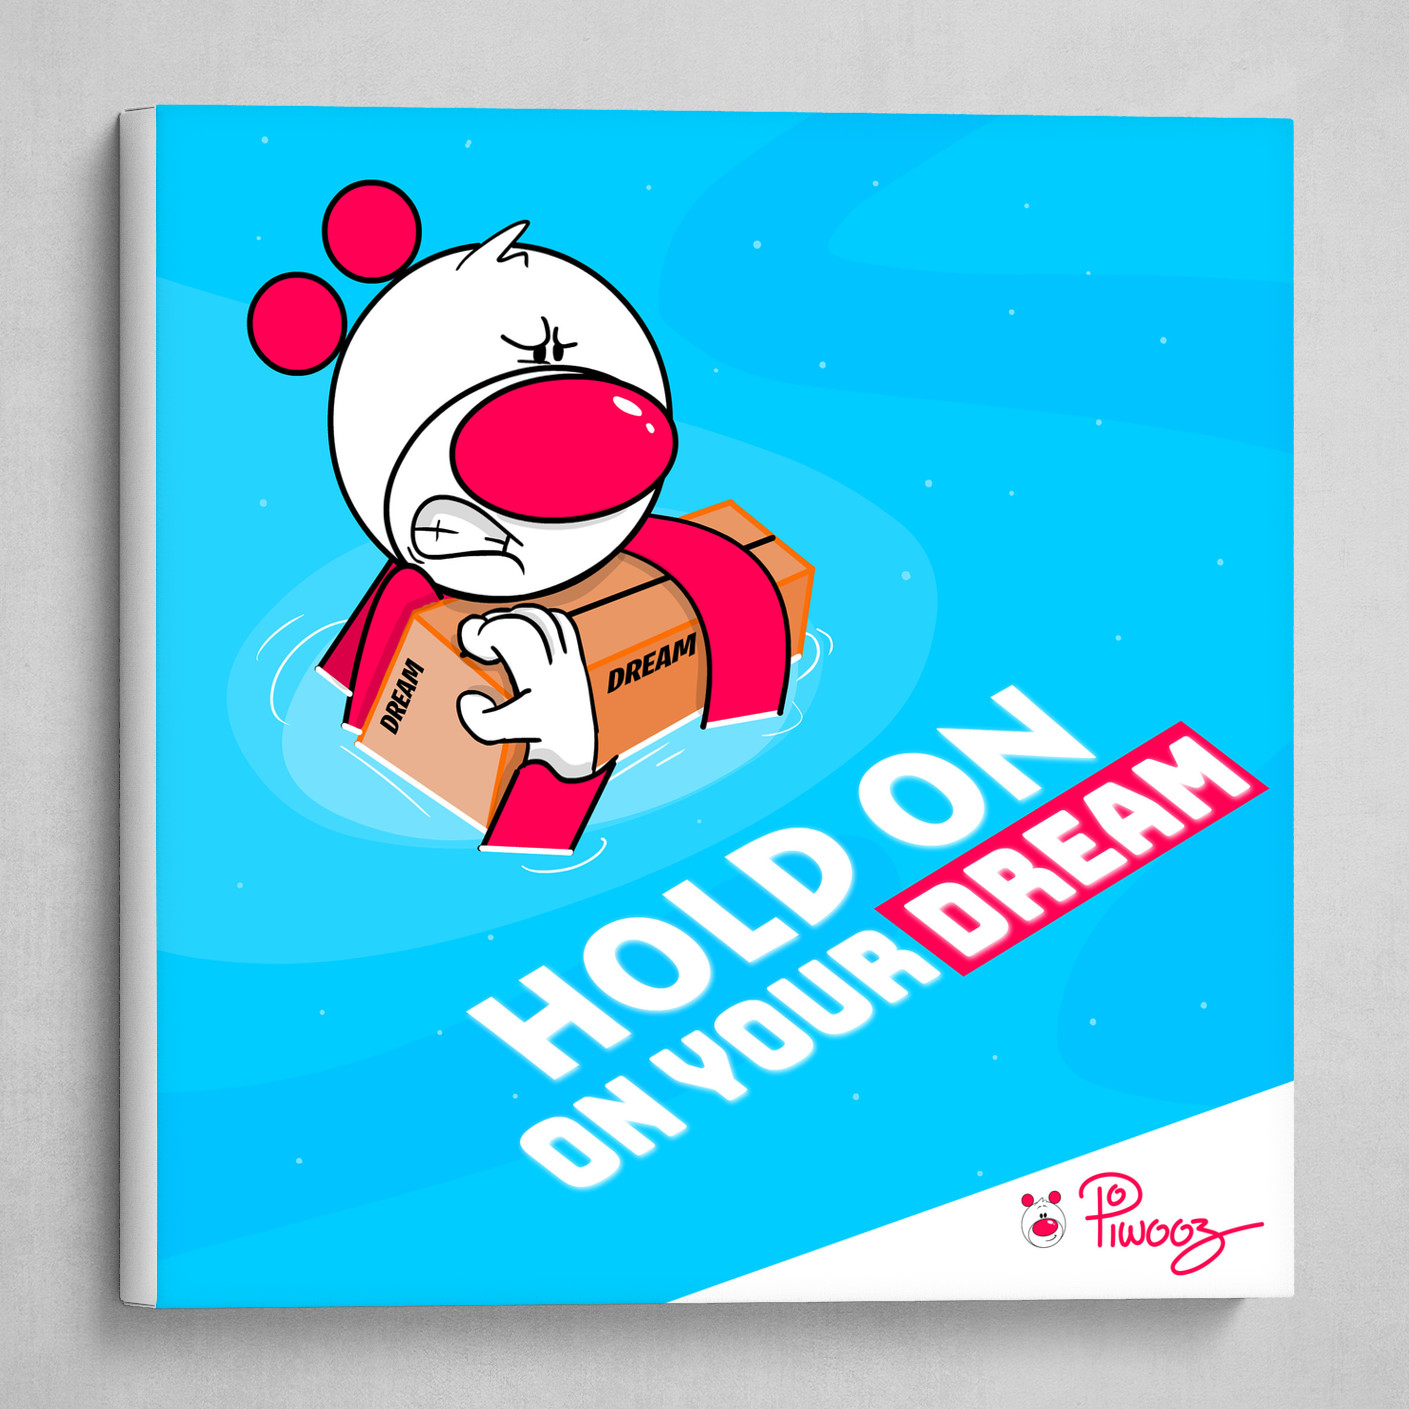 " Hold on, On your dream " Piwooz